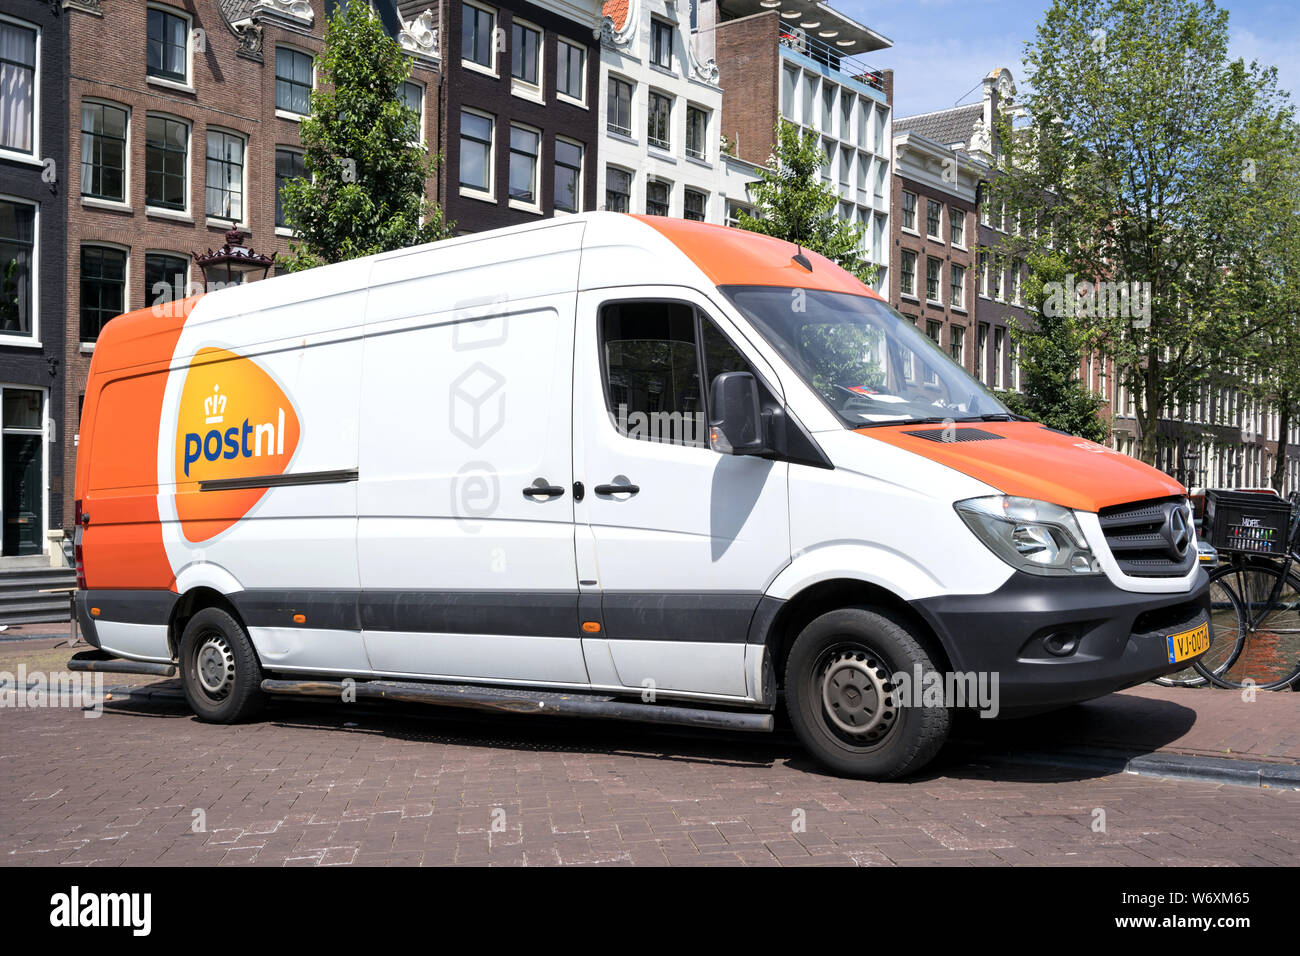 PostNL delivery van. PostNL is a mail, parcel and e-commerce corporation with operations in the Netherlands, Germany, Italy, Belgium, and the U. Stock Photo